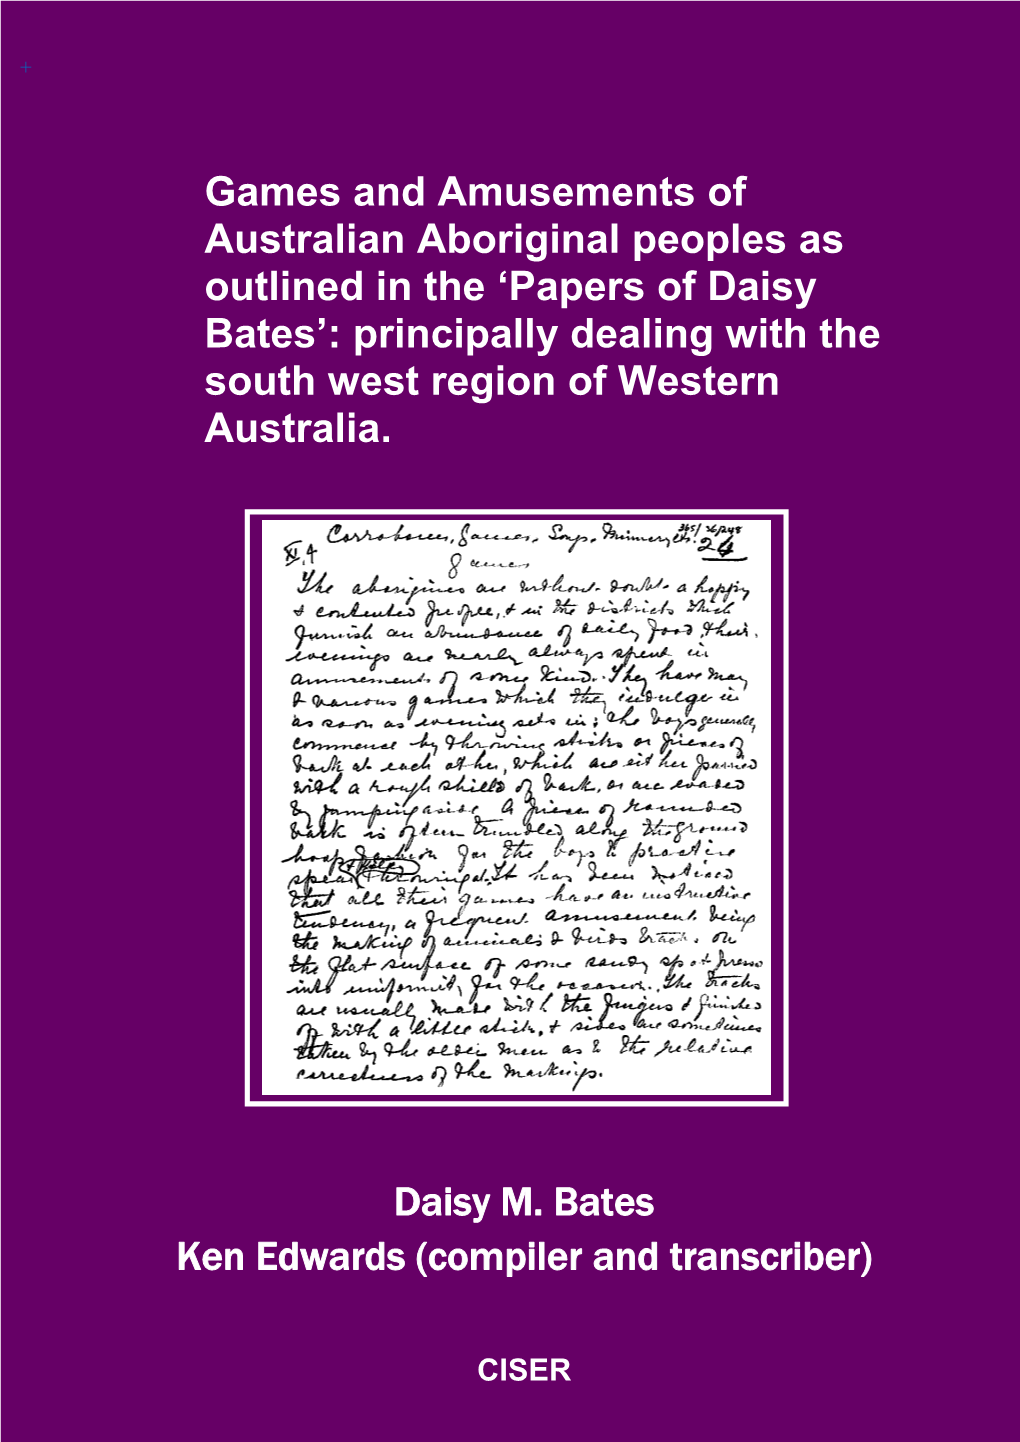 Games and Amusements of Australian Aboriginal Peoples As Outlined in the ‘Papers of Daisy Bates’: Principally Dealing with the South West Region of Western Australia